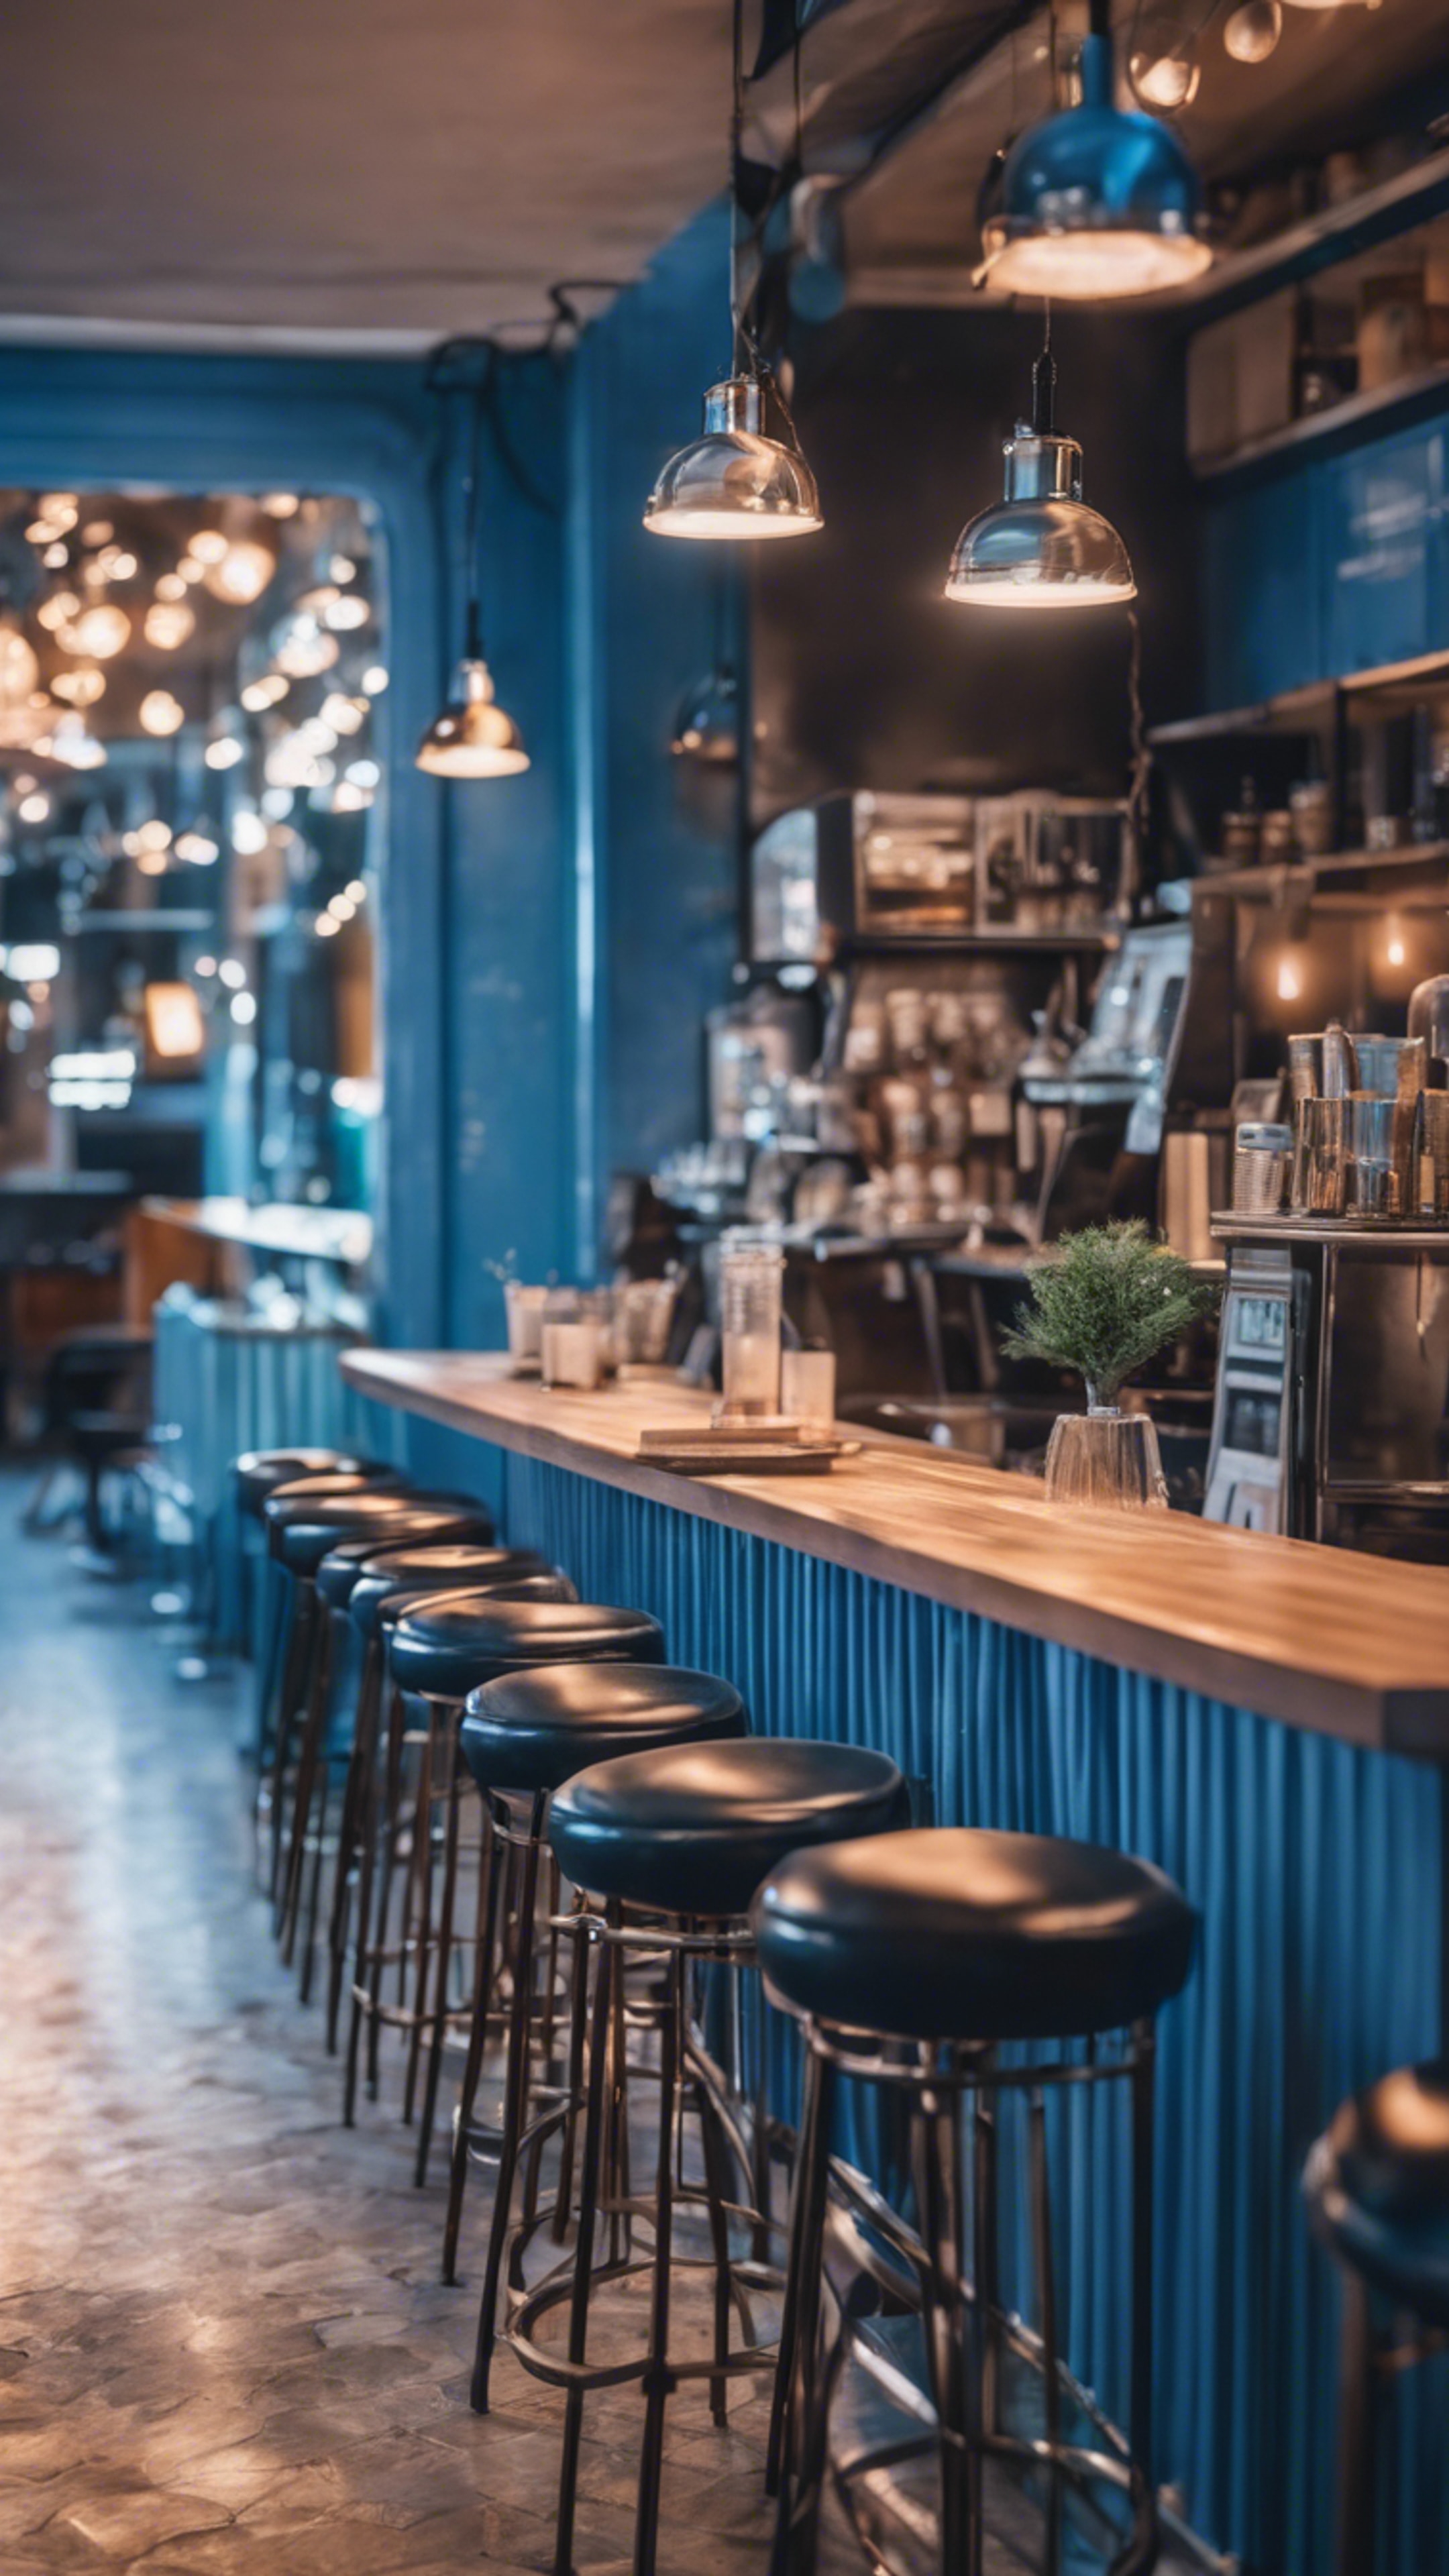 A chic urban cafe with cool blue interiors in the evening Tapet[a944bfd98f8948b498de]